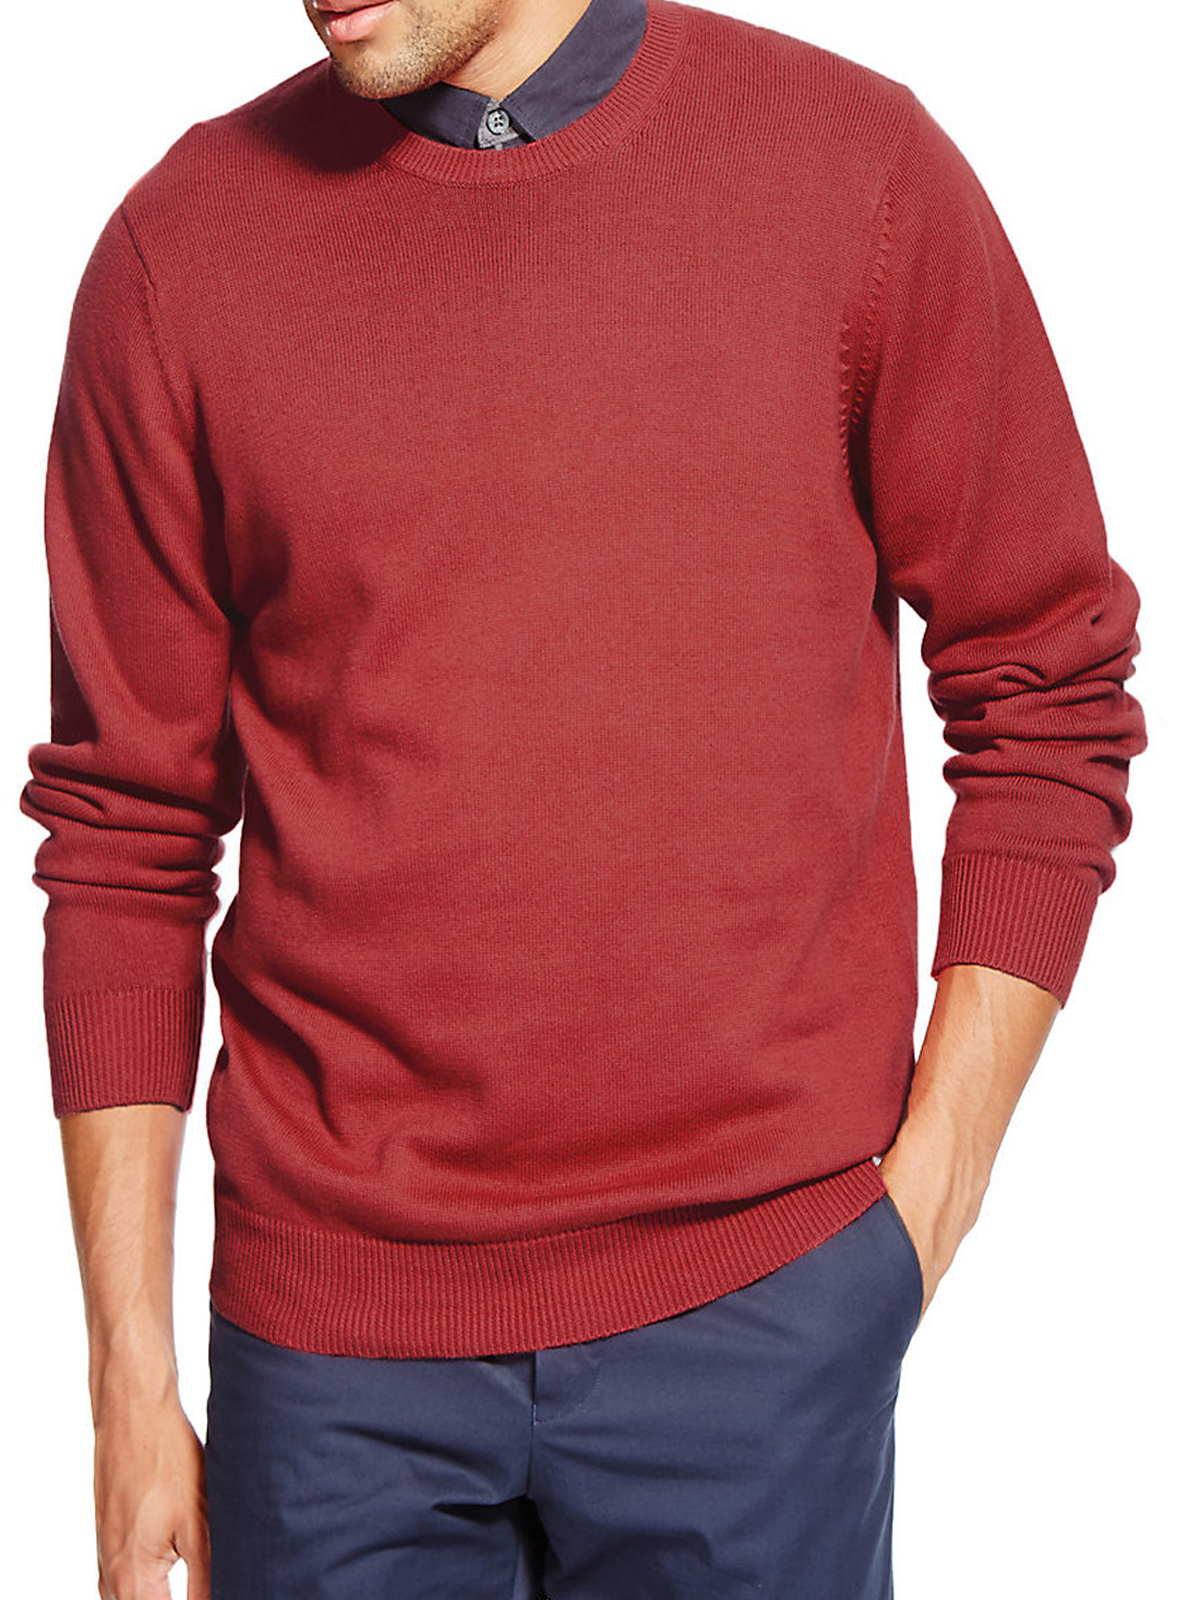 Marks and Spencer - - M&5 REDWOOD Pure Cotton Long Sleeve Jumper - Size ...